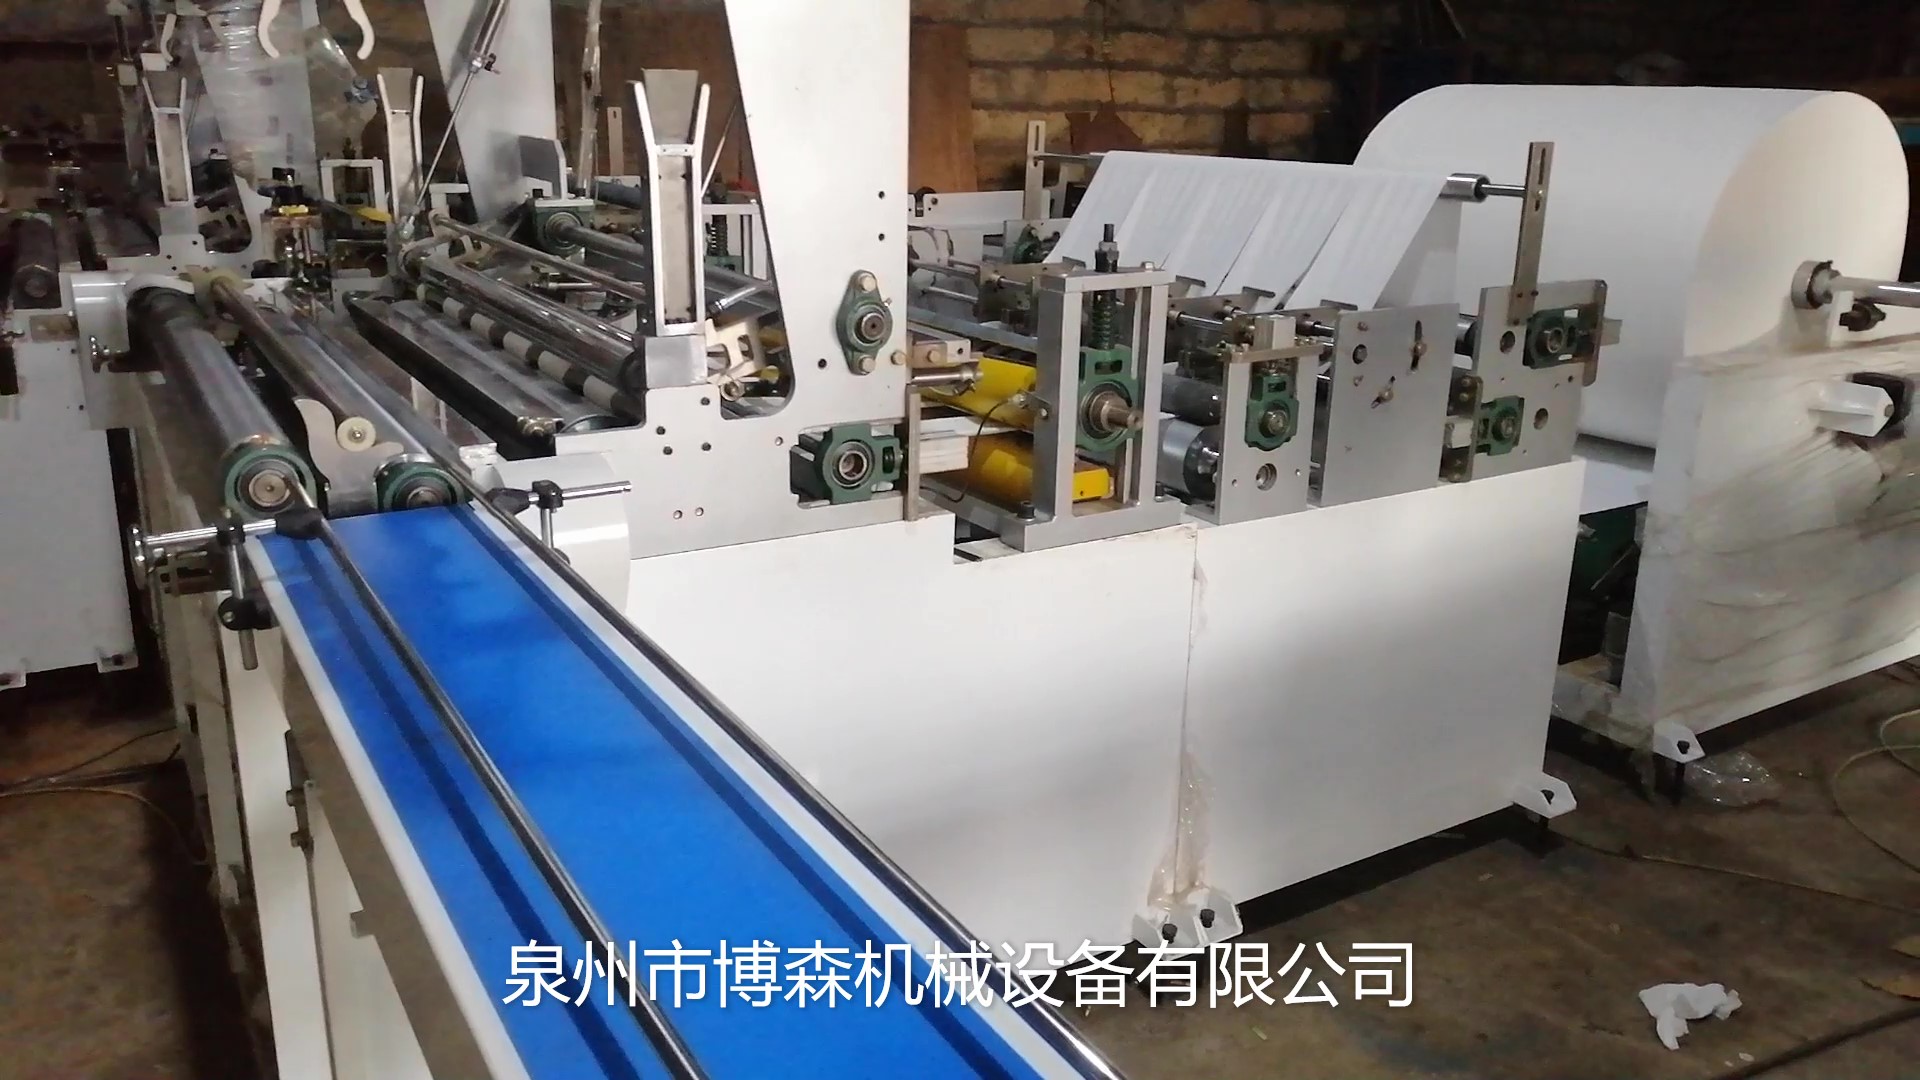 Roll-type cotton towel/face towel facility